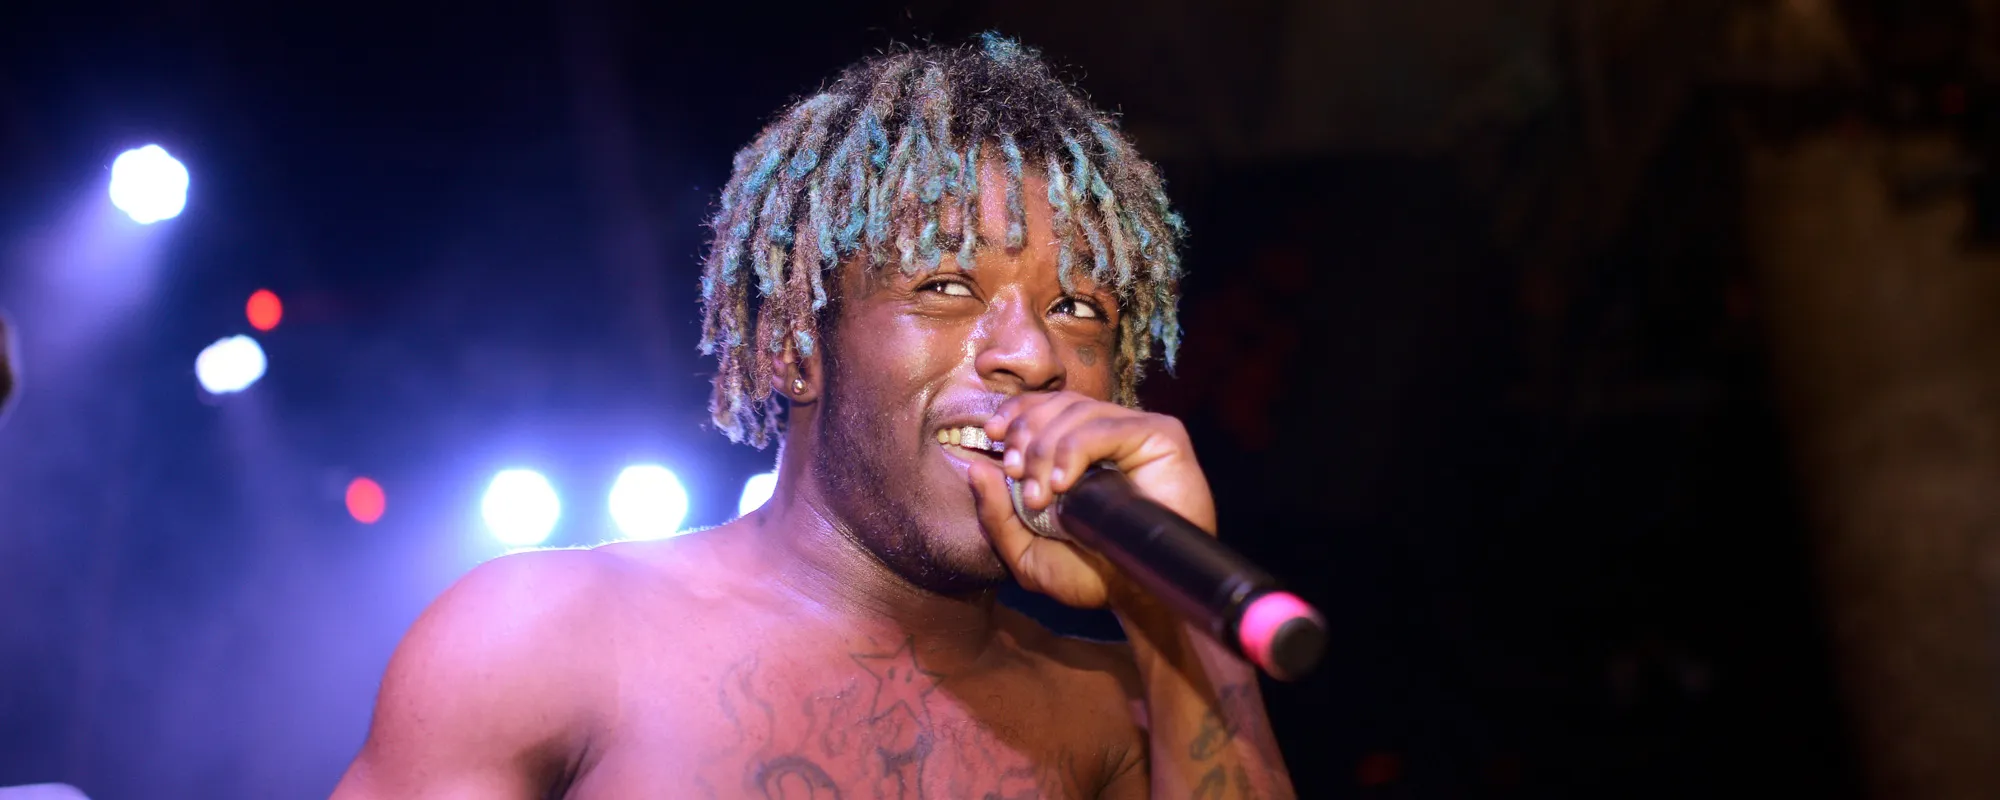 Lil Uzi Vert Says ‘The Pink Tape’ Is In Final Stages: “This Time I Promise”